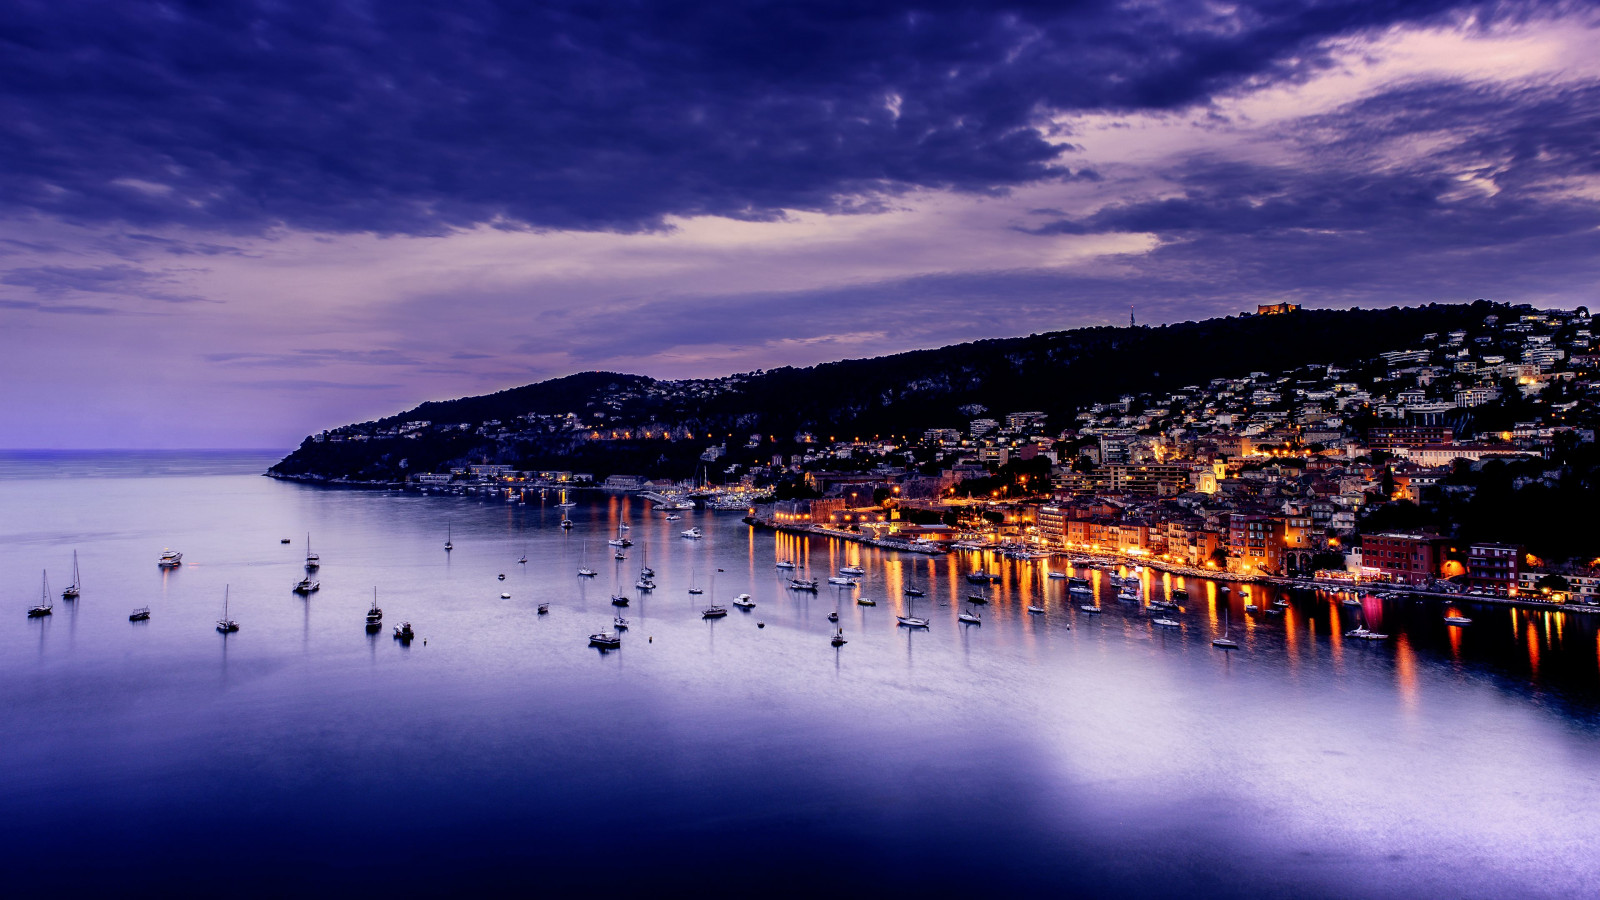 sunset-picture-over-villefranche-1600x900_666568-mm-90.jpg